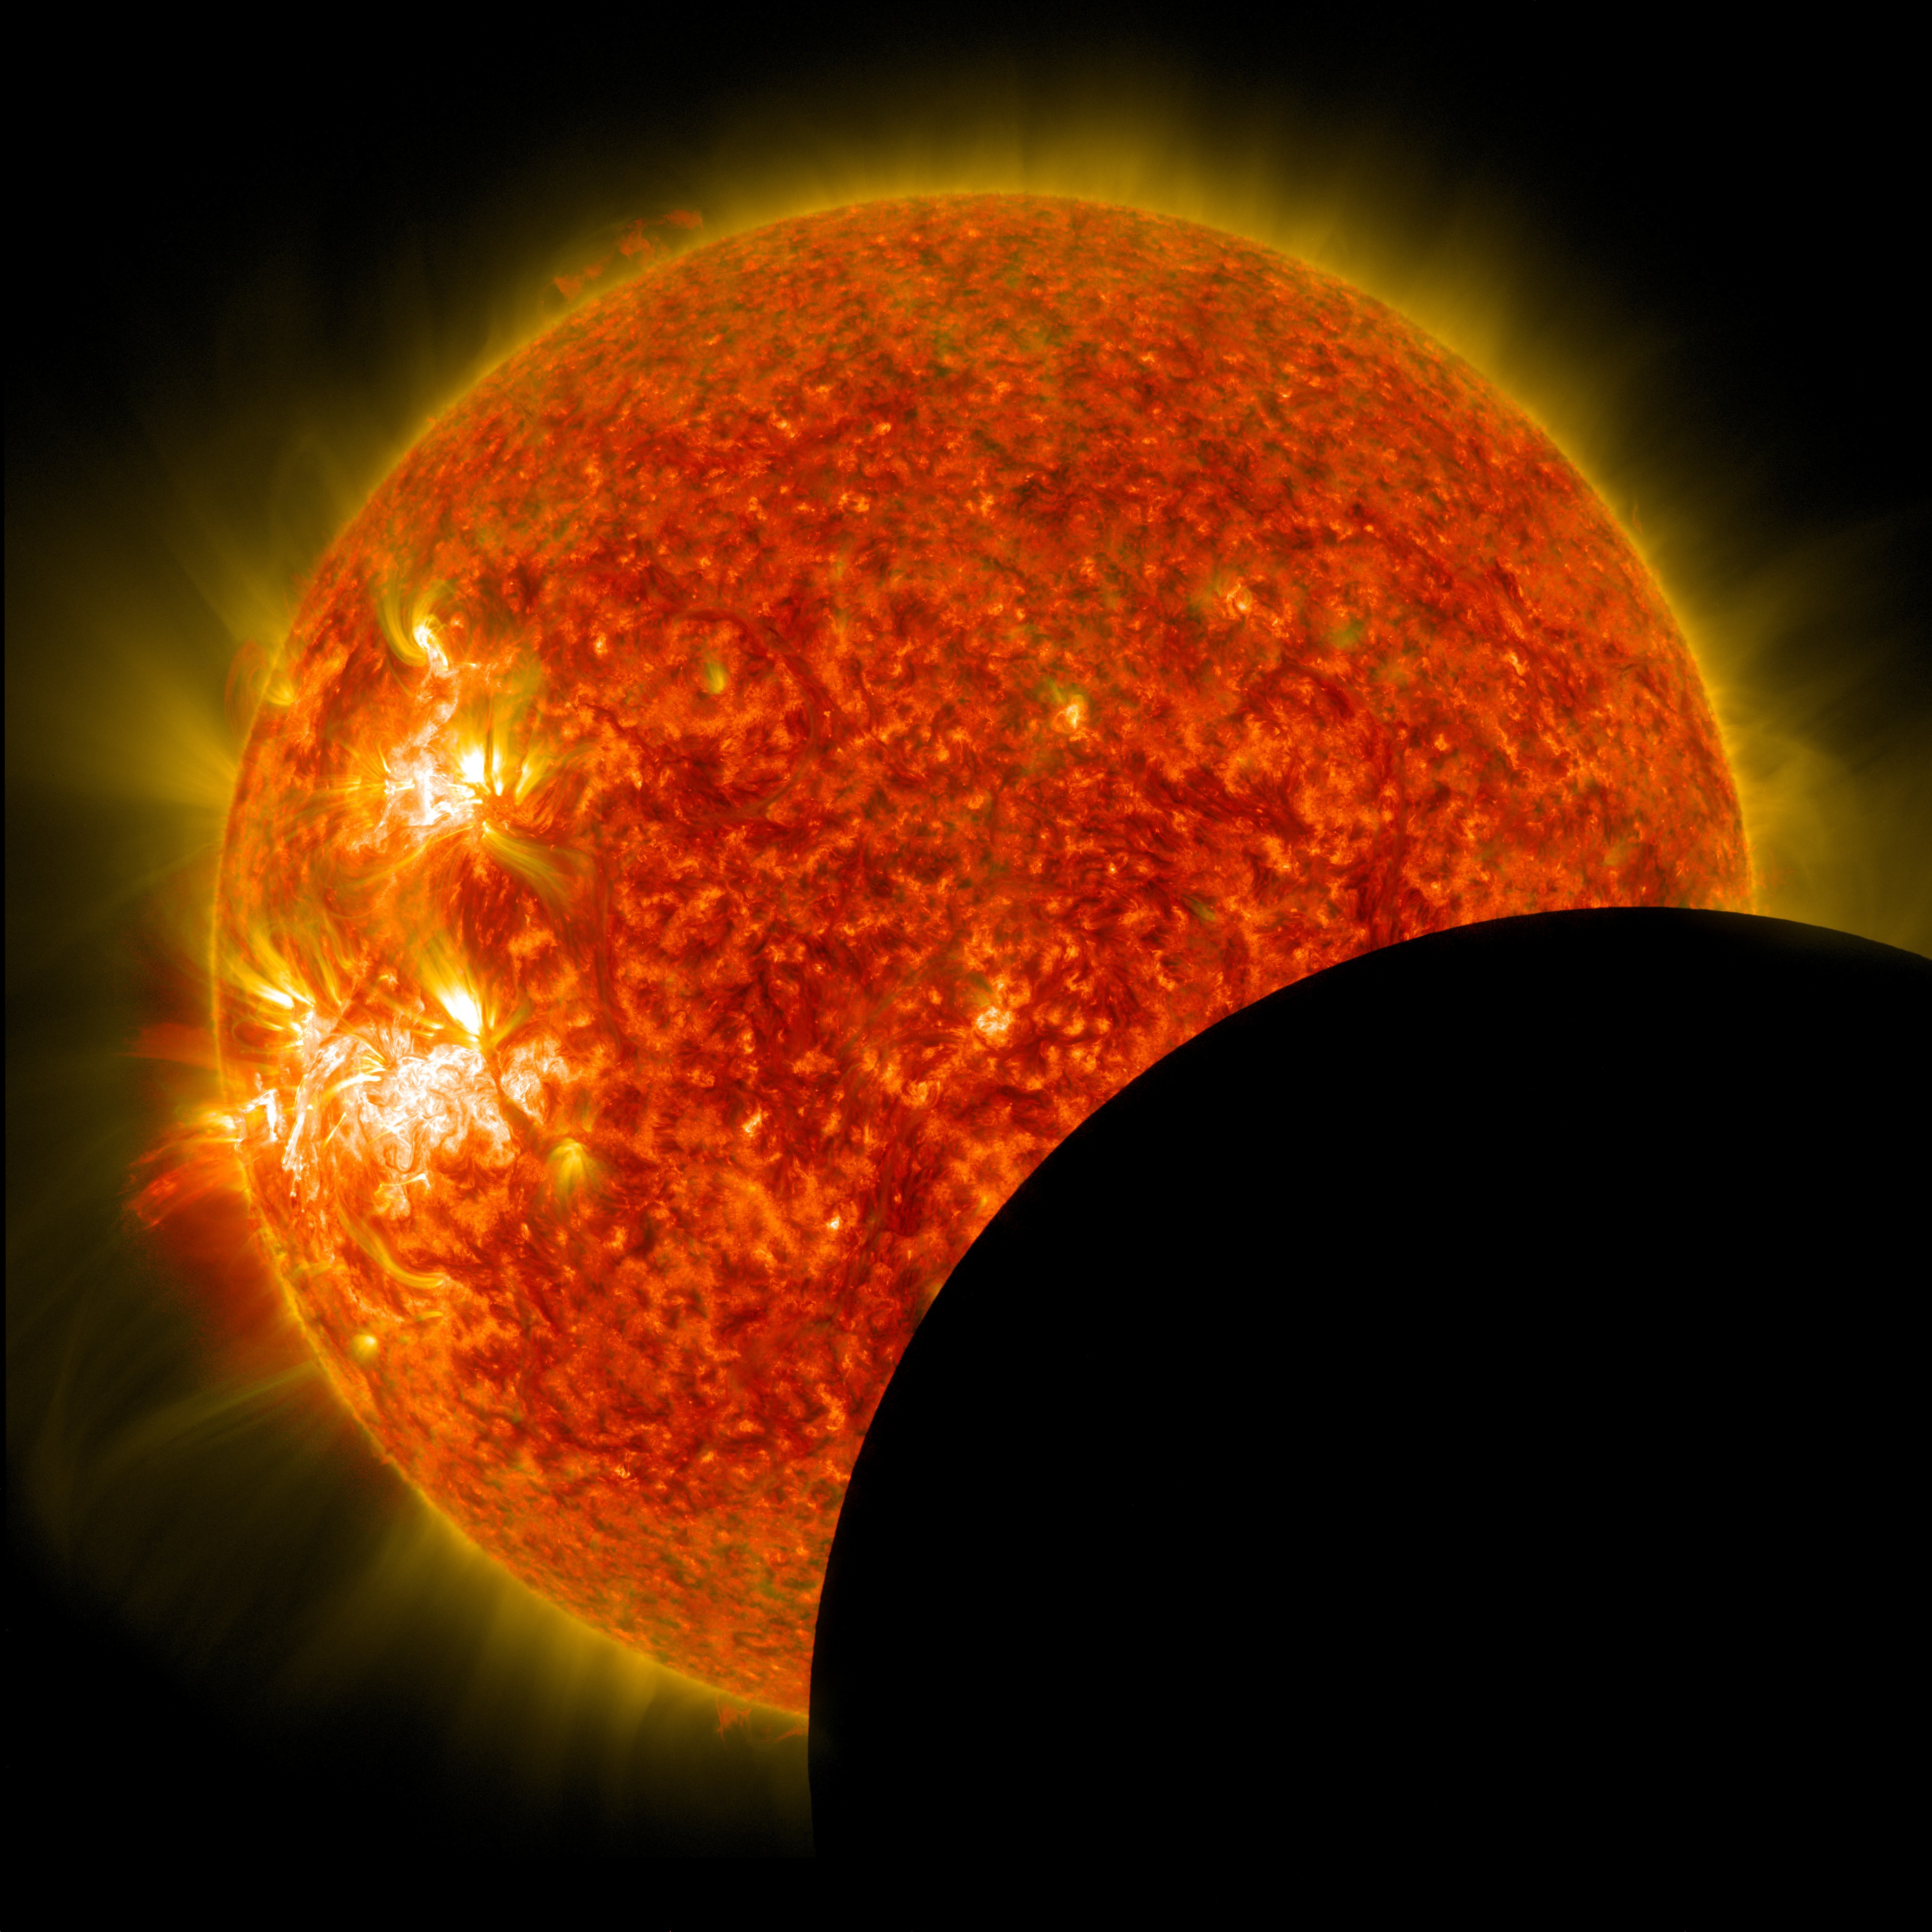 NASA's Solar Dynamics Observatory captured this image of the moon crossing in front of its view of the sun on Jan. 30, 2014, at 10:30 a.m. EST in 171 and 304 angstrom light. The two wavelengths are blended together. Credit: NASA/SDO